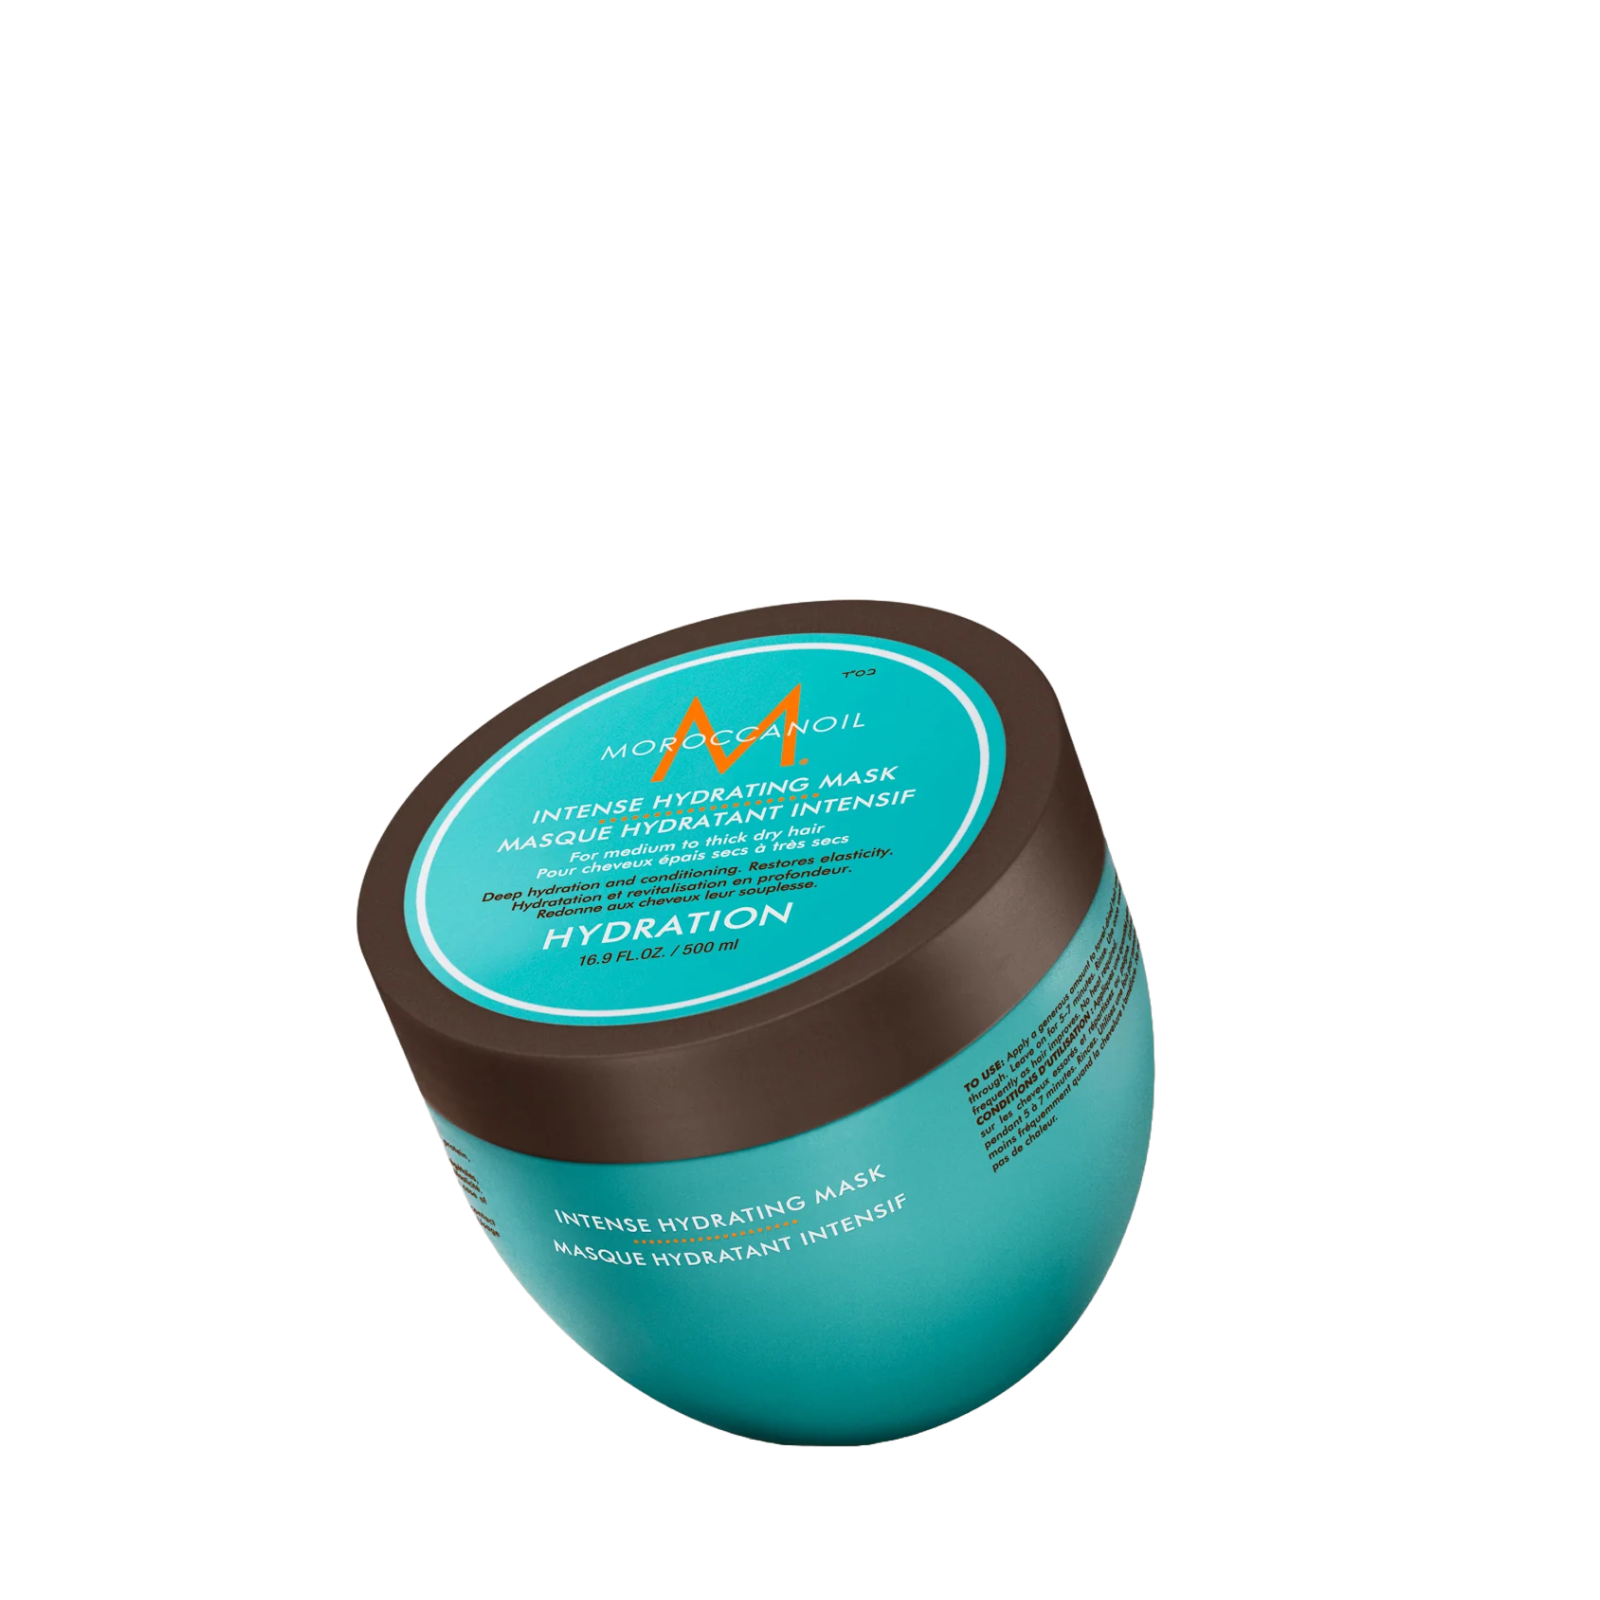 Deep conditioning mask (MoroccanOil Intense Hydrating Mask)